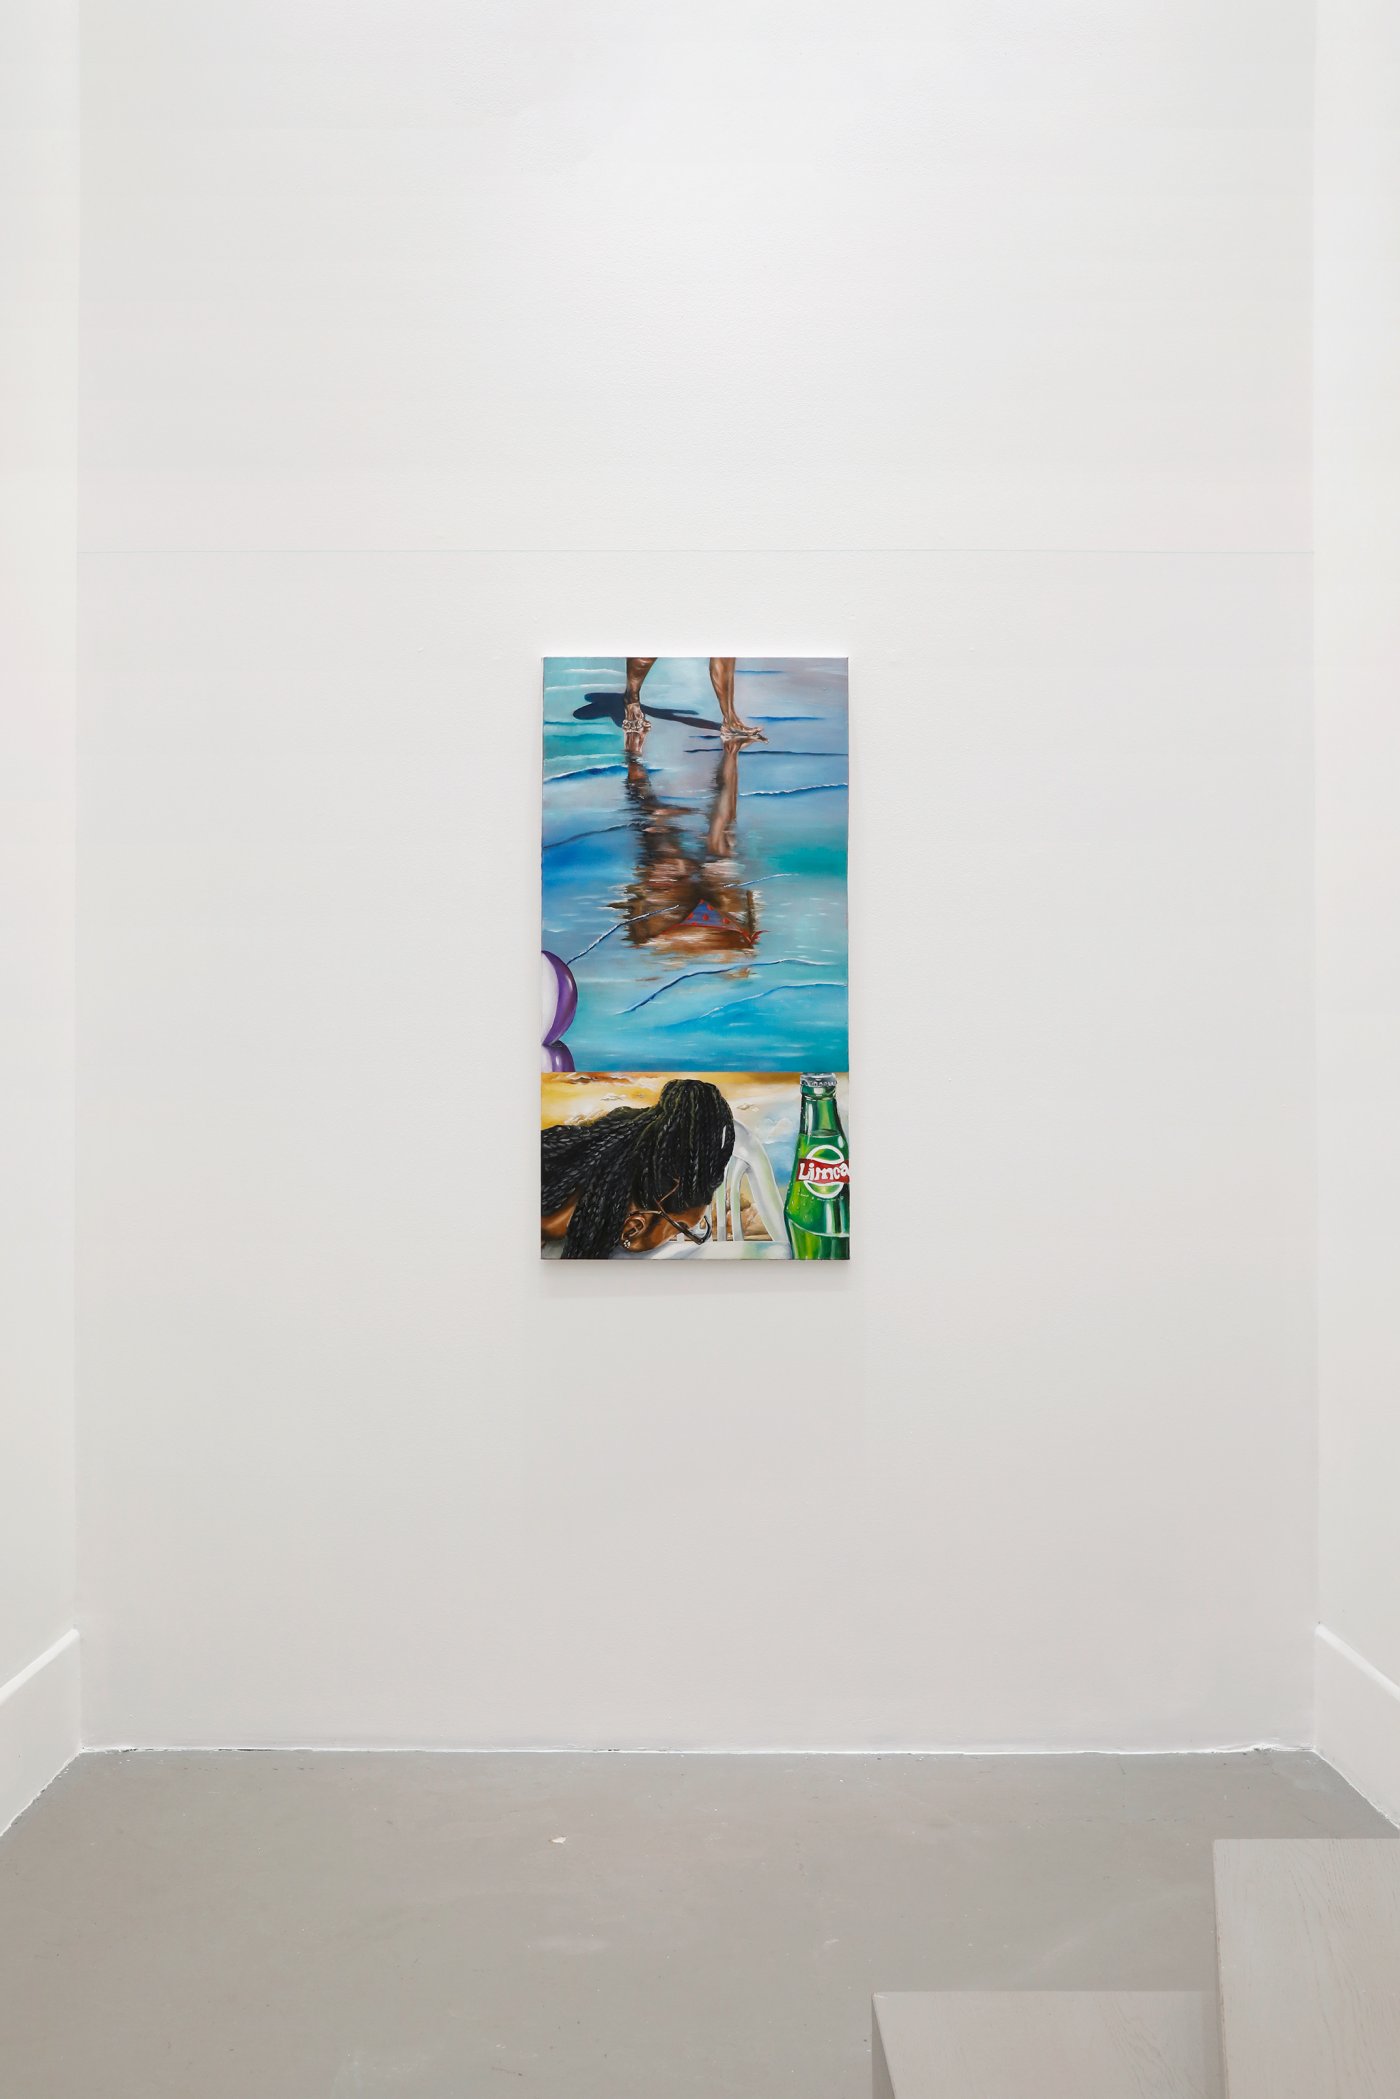 Installation image for Ekene Emeka-Maduka: A resting place for worries: Shortcomings of a warm, tight hug, at Fabienne Levy